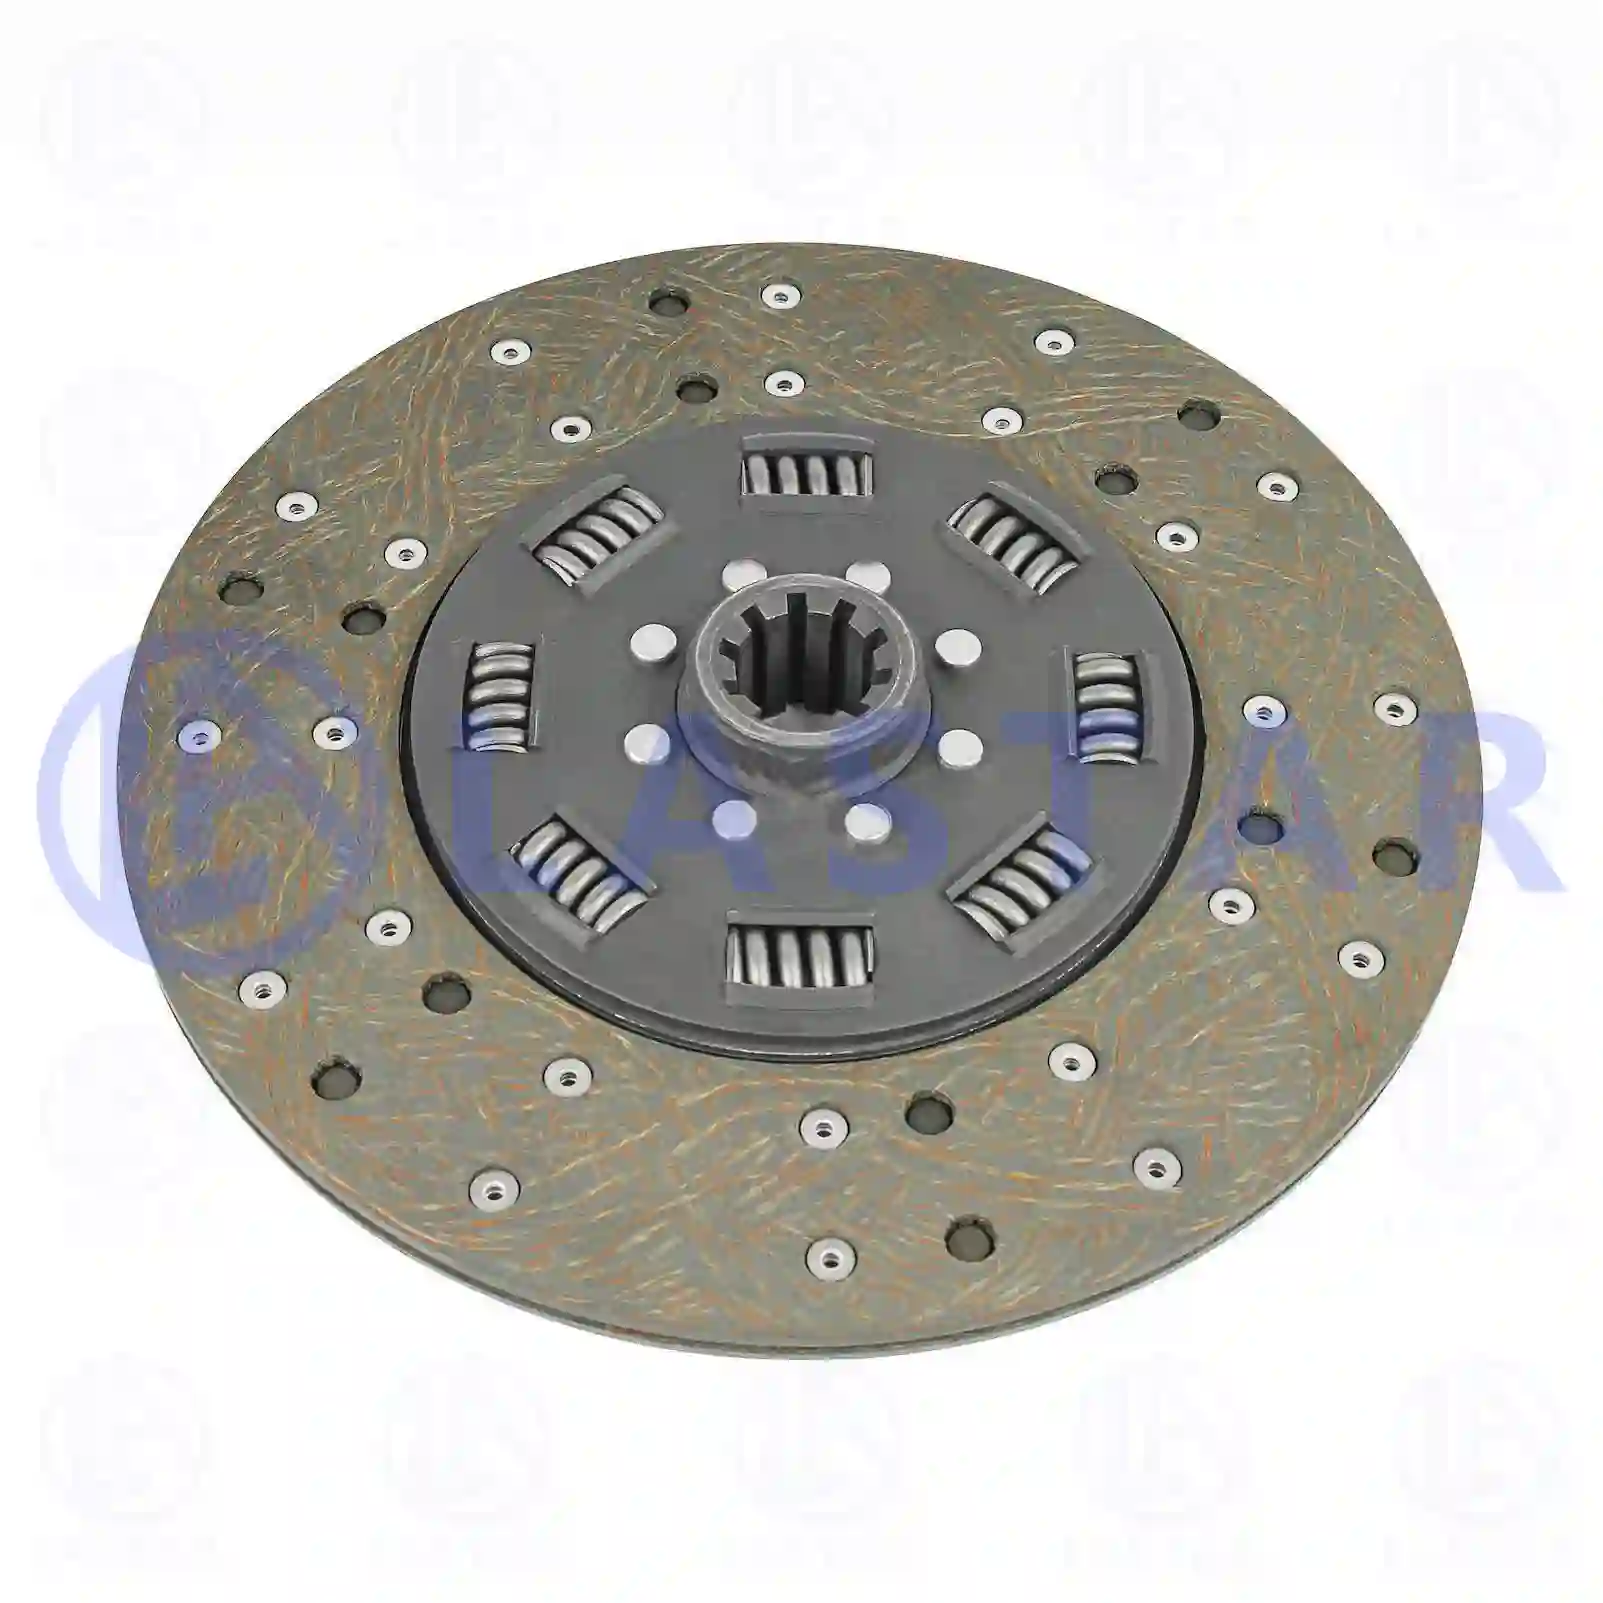 Clutch disc, 77721853, 354433A1, 0002500503, 0002503303, 0002503503, 0012500503, 0012503603, 0012504003, 0012504103, 0022503603, 0042506603, 0052509403, 0052509503, 0072501803, 0072501903, 0082502203, 0082502303, 0102508503, 0132505403, 0132508503, 0132508903, 0142505303, 0142505403, 0172501703, 0172501803, 0222501303, 3442507003, 1000160901, 159000160901, 354433A1, 59000160001, 59000160901 ||  77721853 Lastar Spare Part | Truck Spare Parts, Auotomotive Spare Parts Clutch disc, 77721853, 354433A1, 0002500503, 0002503303, 0002503503, 0012500503, 0012503603, 0012504003, 0012504103, 0022503603, 0042506603, 0052509403, 0052509503, 0072501803, 0072501903, 0082502203, 0082502303, 0102508503, 0132505403, 0132508503, 0132508903, 0142505303, 0142505403, 0172501703, 0172501803, 0222501303, 3442507003, 1000160901, 159000160901, 354433A1, 59000160001, 59000160901 ||  77721853 Lastar Spare Part | Truck Spare Parts, Auotomotive Spare Parts